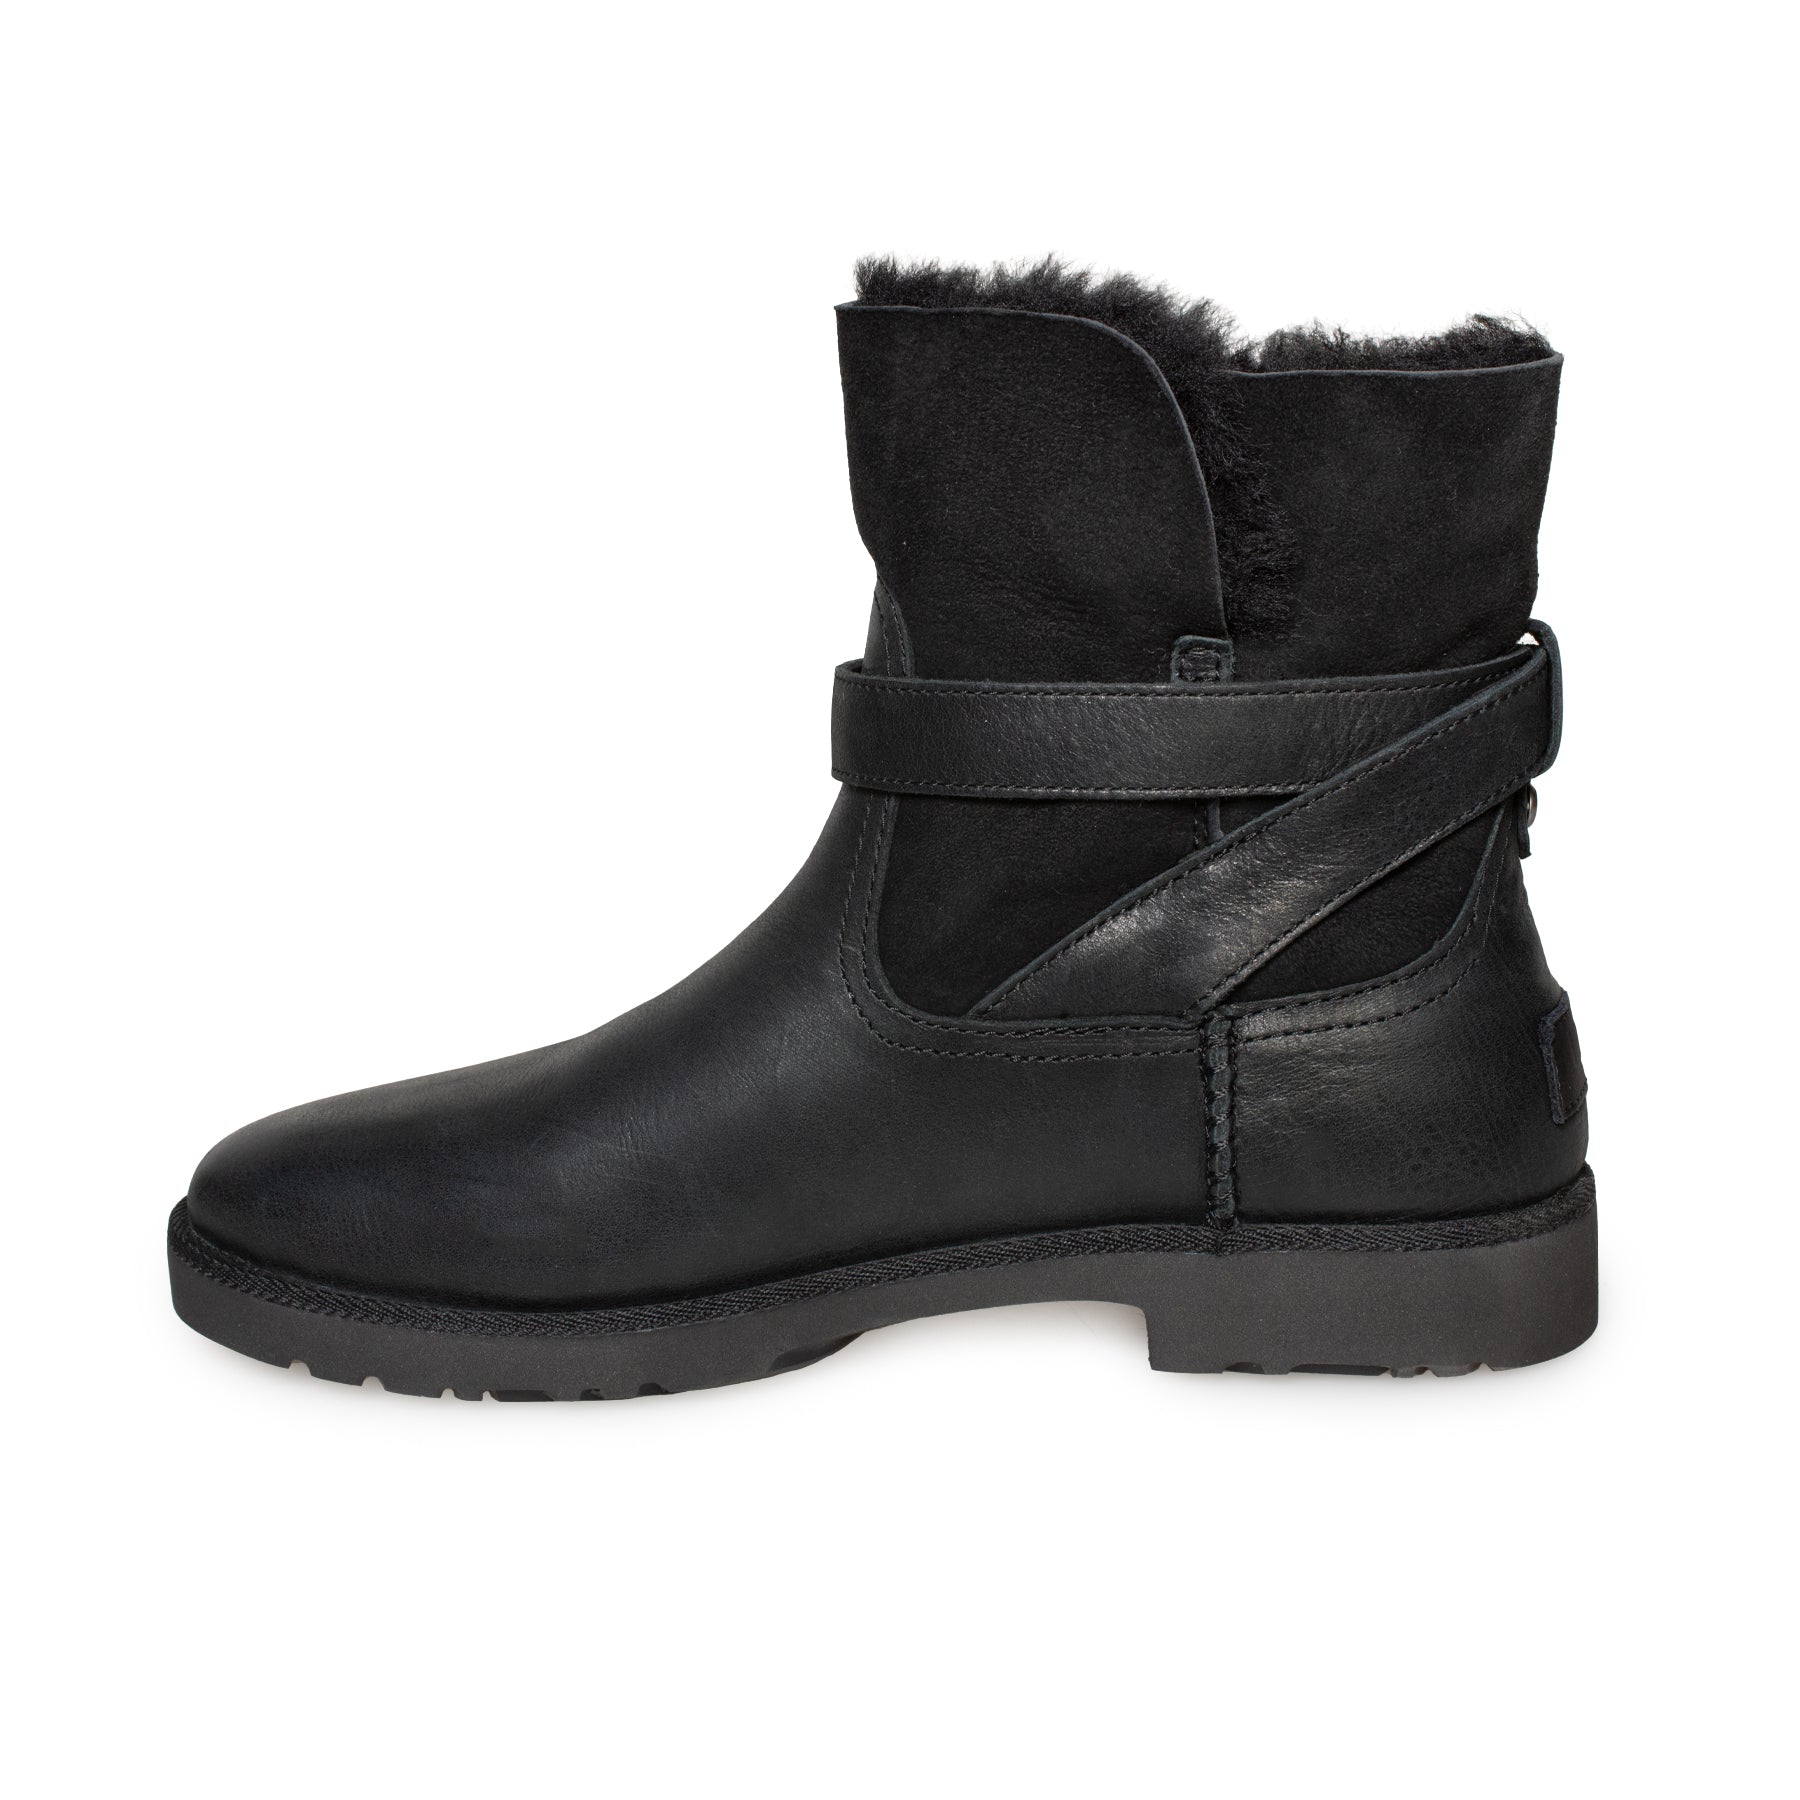 UGG Romely Buckle Black Boots - Women's – MyCozyBoots